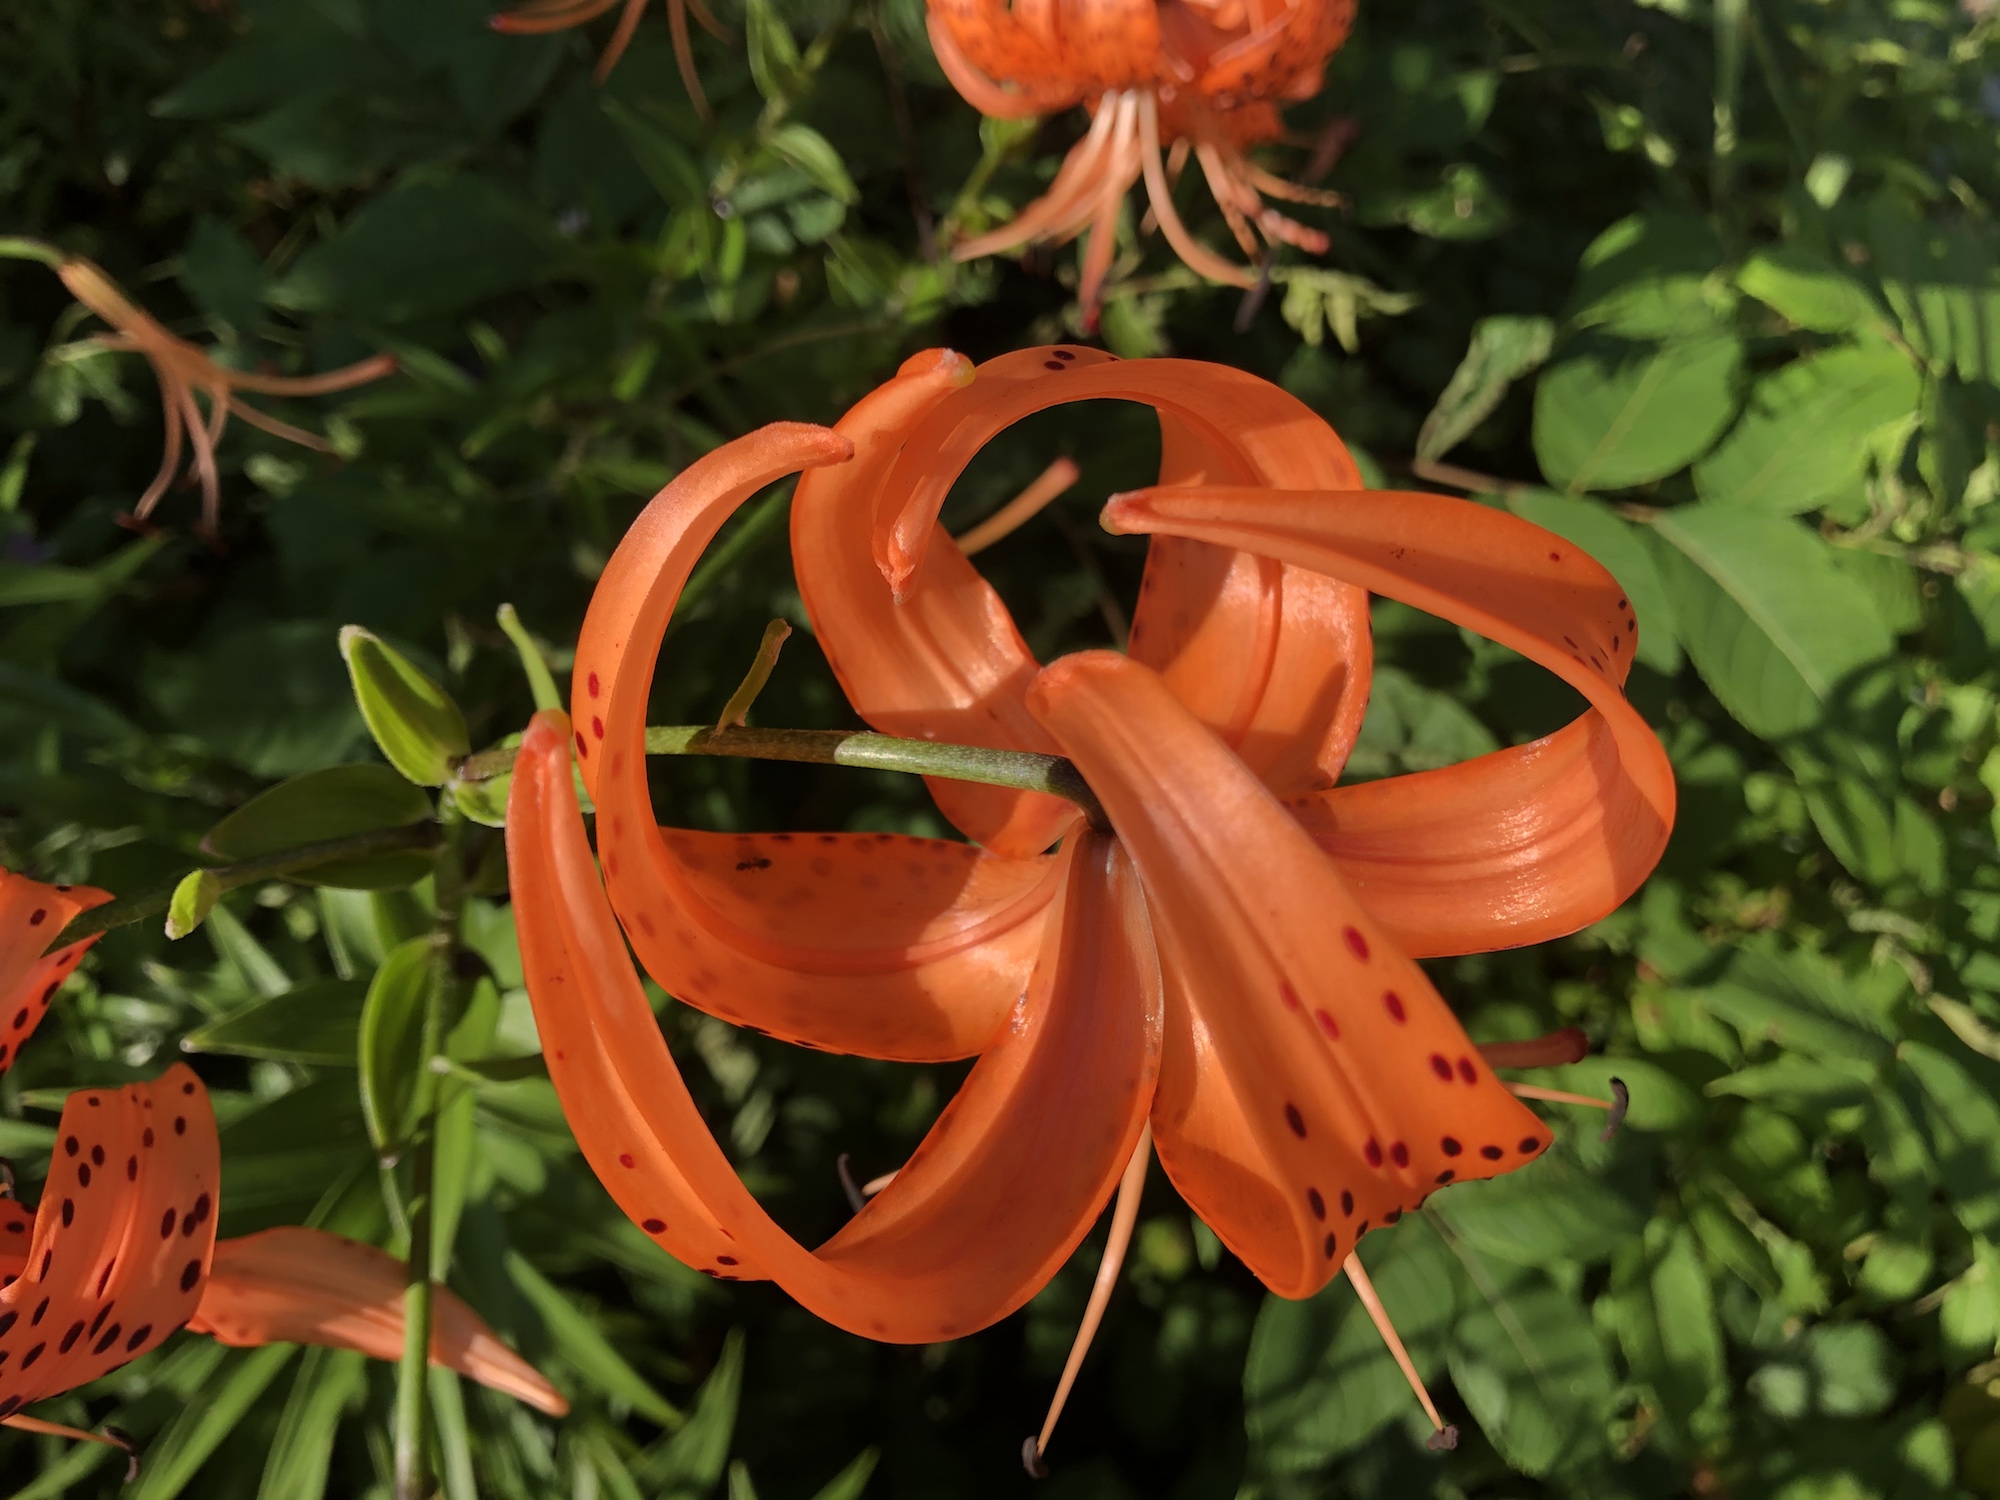 Looking down on a tall Tiger Lily near the Duck Pond on August 2, 2020.